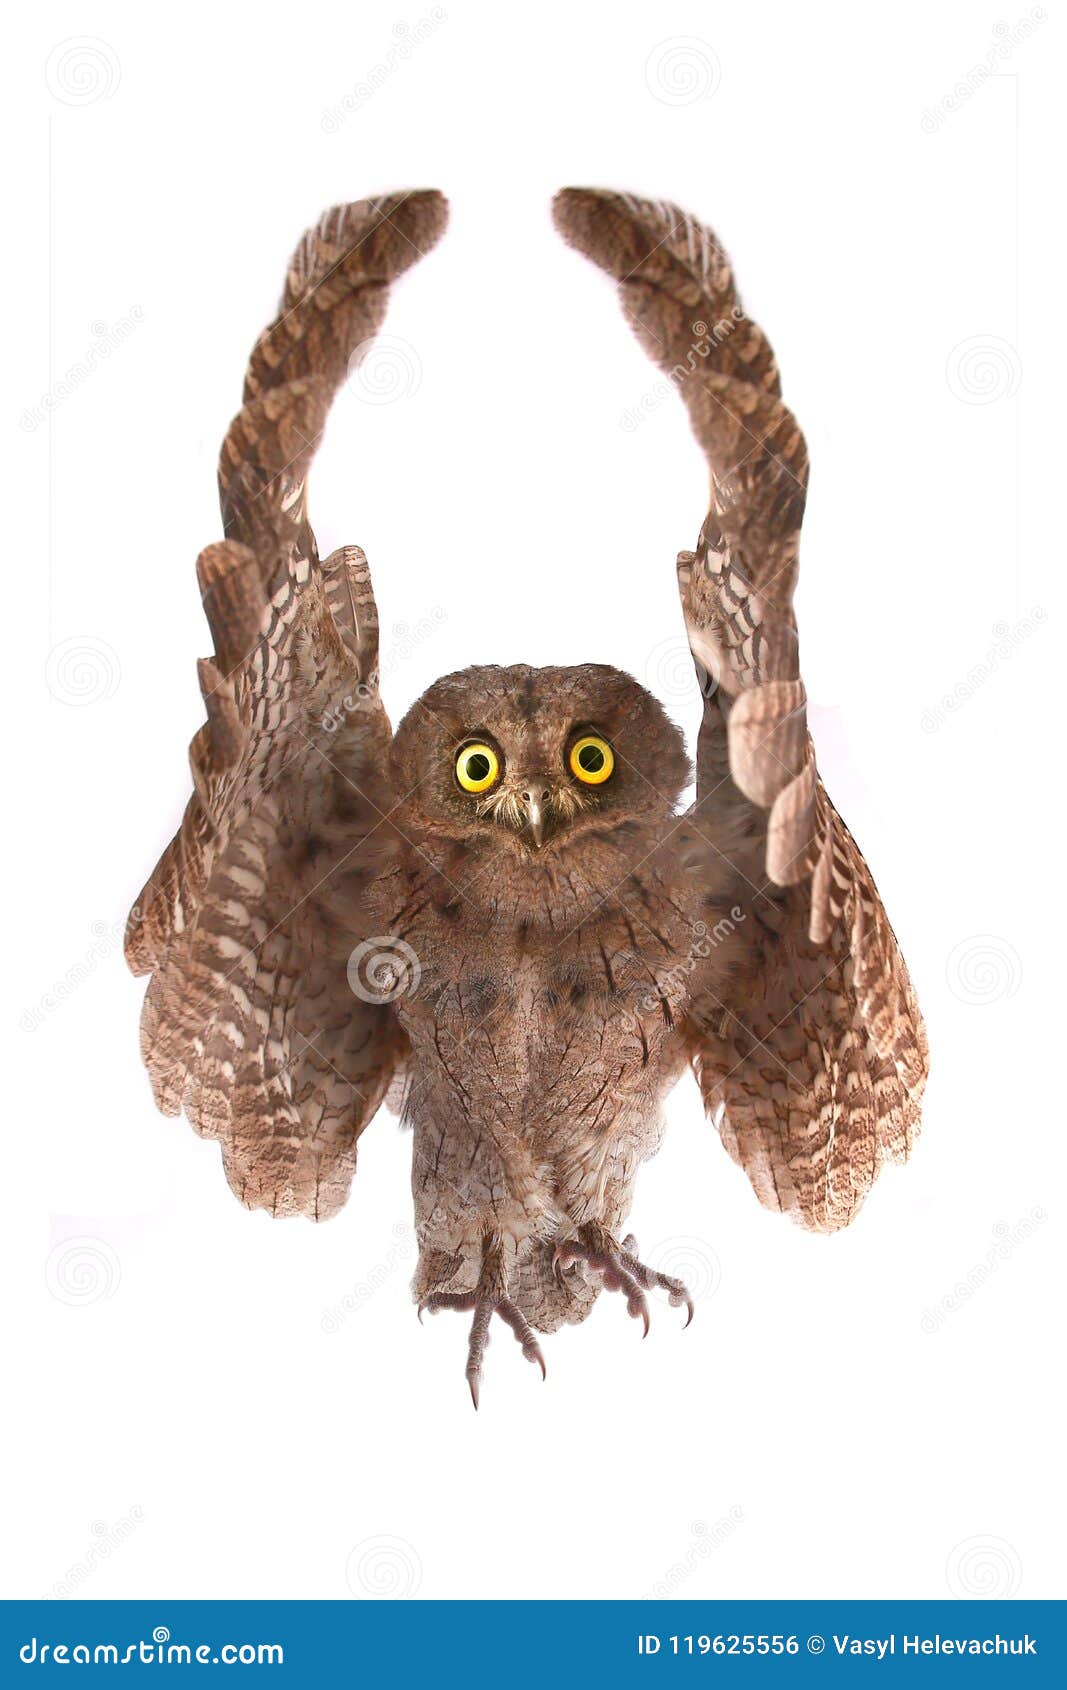 owl with raised wings